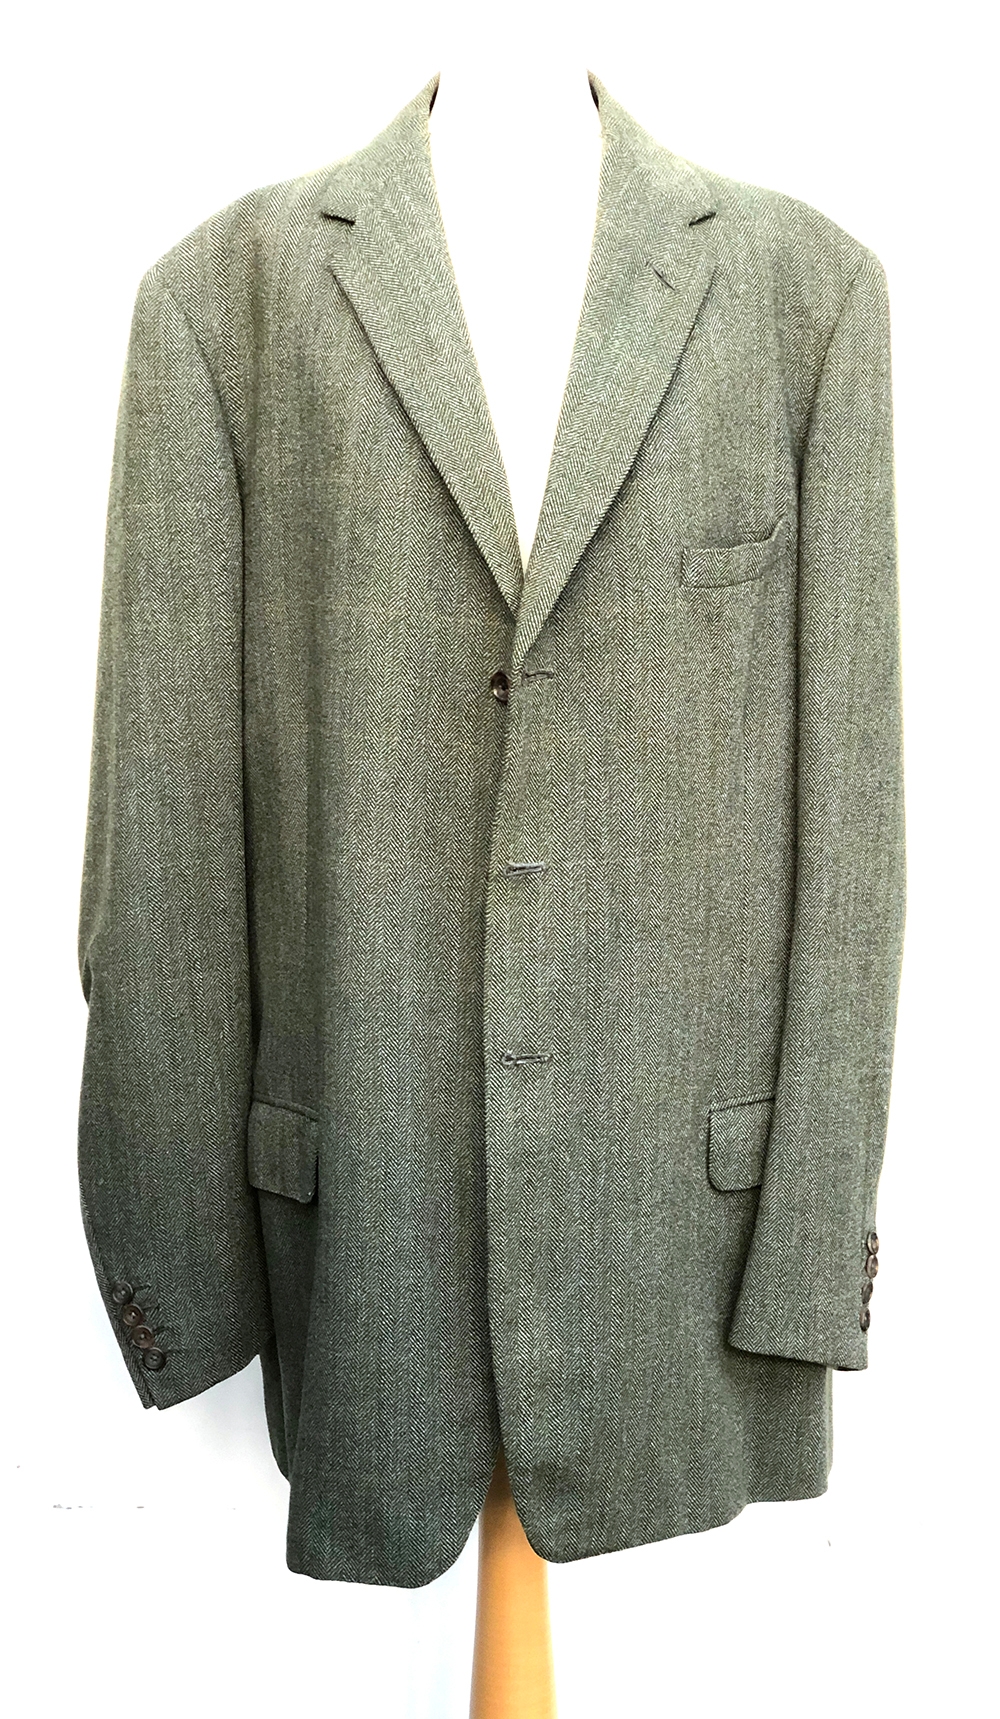 A Denman & Goddard three piece tweed suit c.1967, the trousers with button fly and brace buttons,